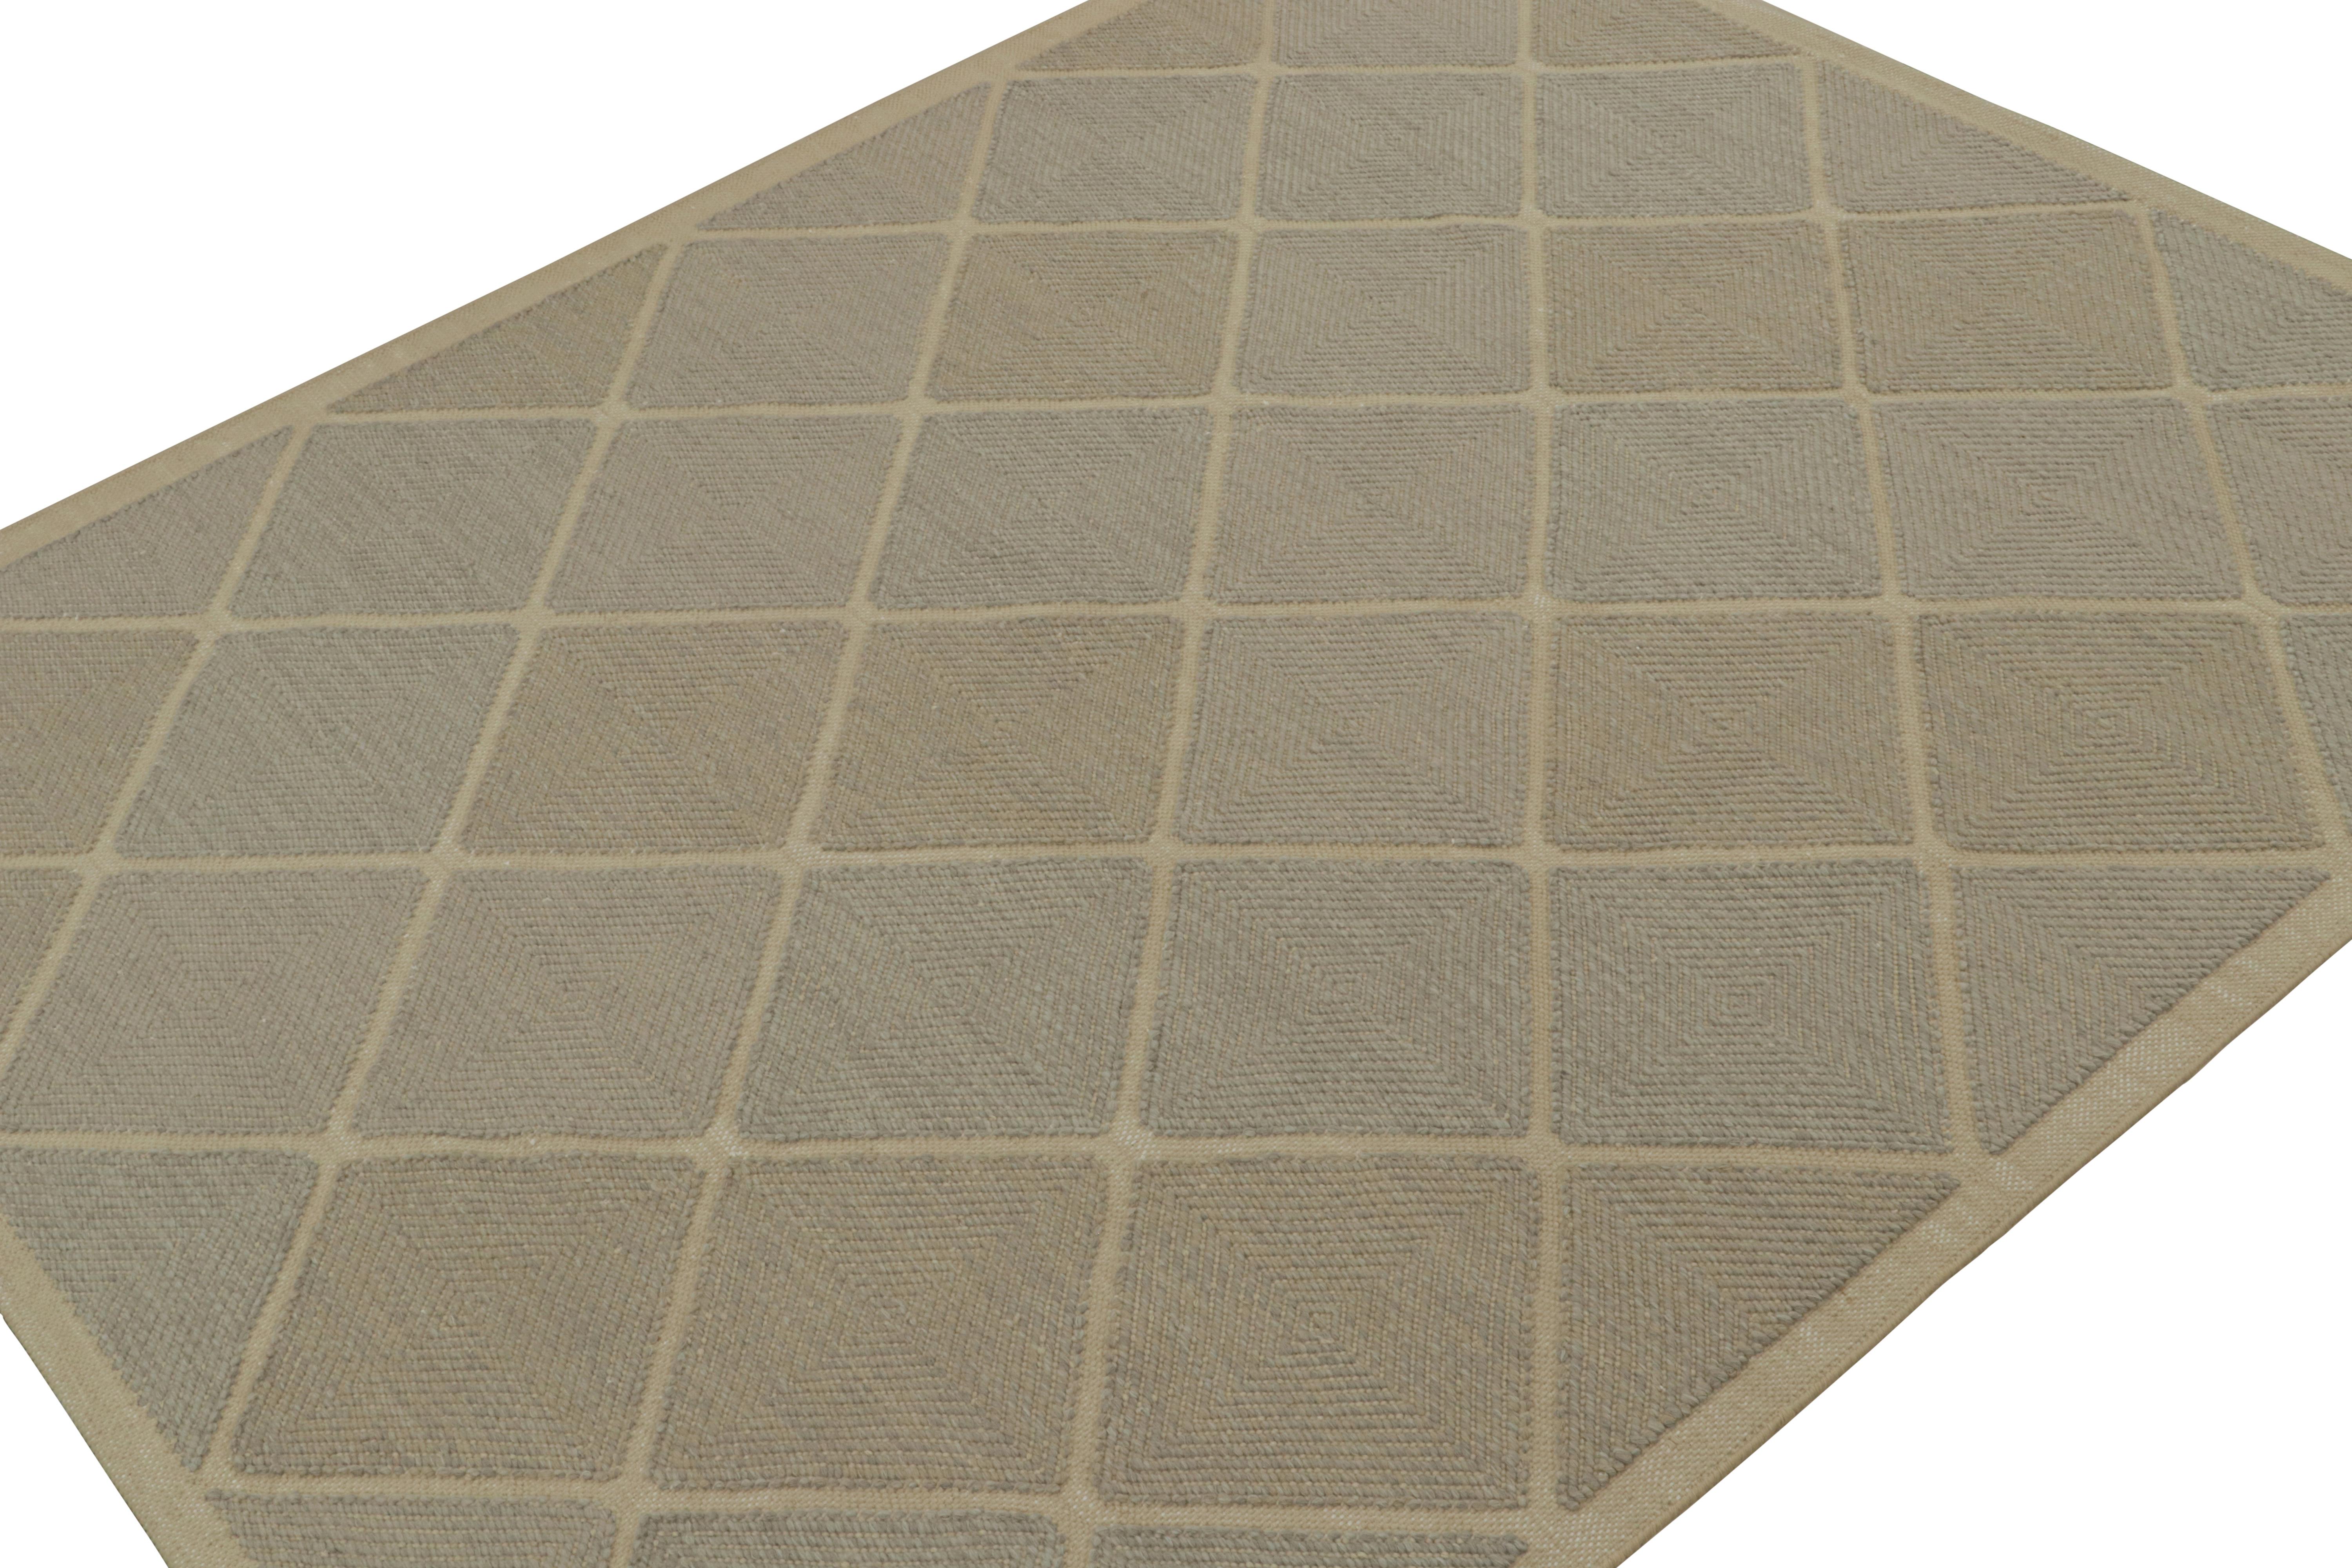 A smart 8x10 Swedish style custom kilim rug from our award-winning Scandinavian flat weave collection. Handwoven in wool, cotton & undyed natural yarn.

On the Design: 

This rug enjoys geometric patterns in brown & gray. Keen eyes will admire